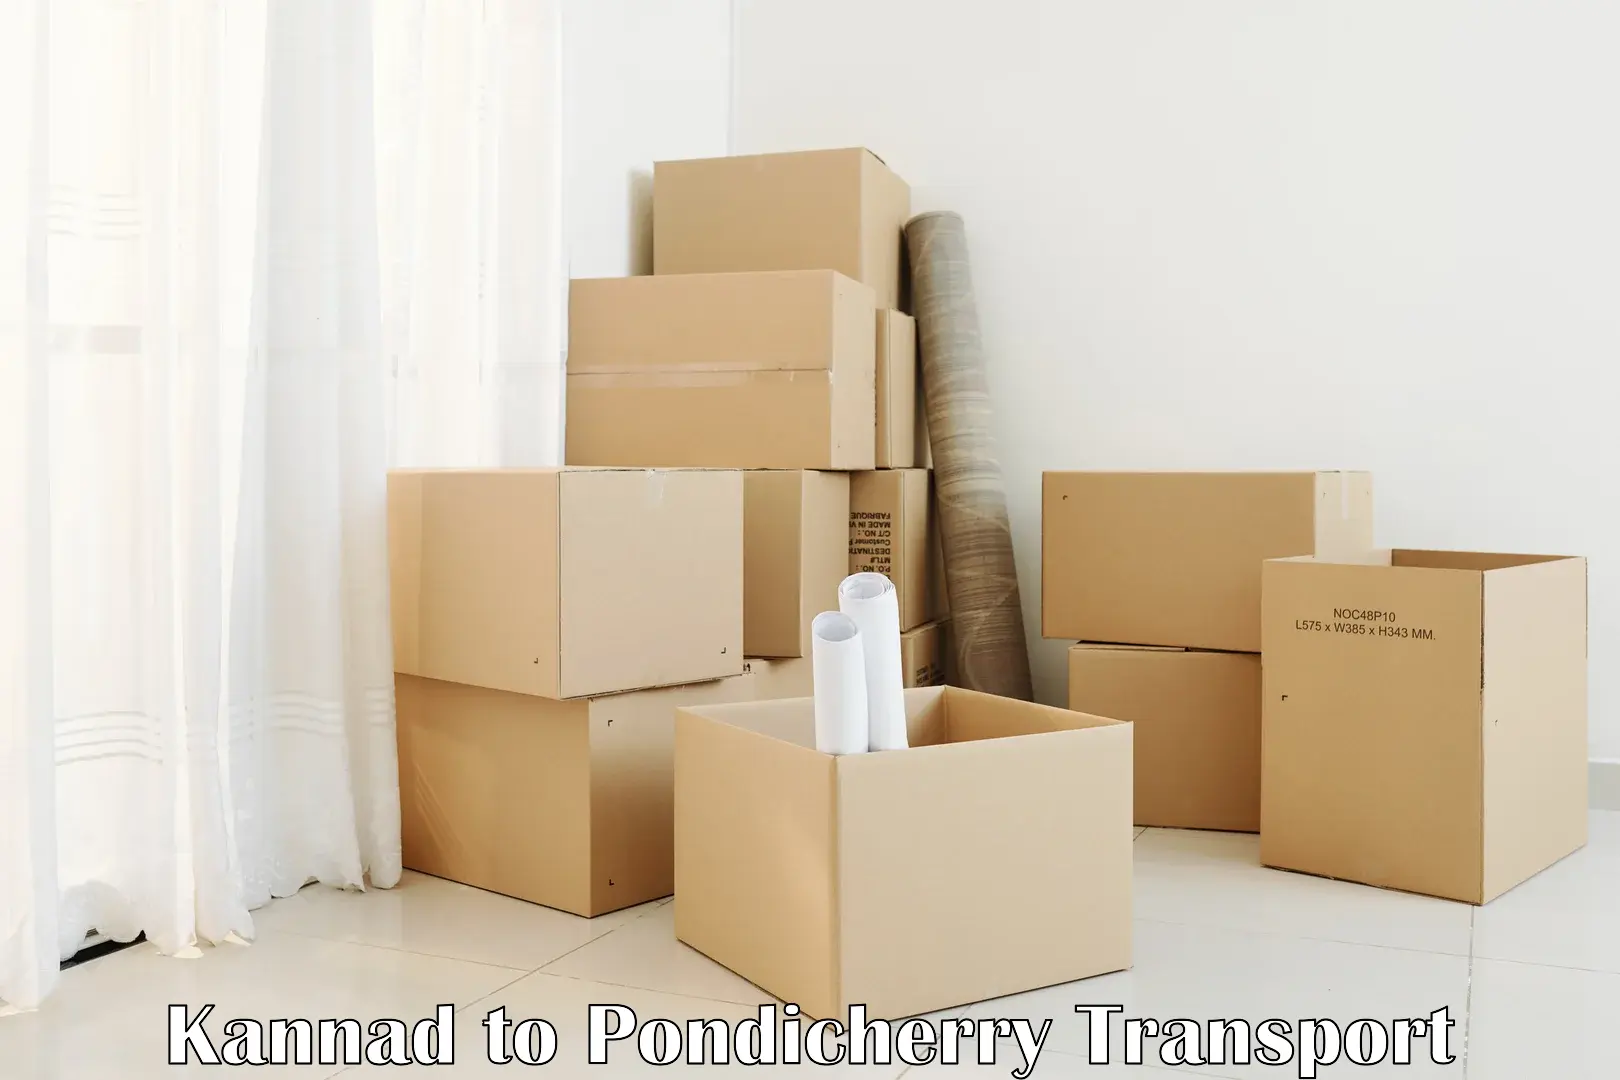 Air freight transport services in Kannad to Pondicherry